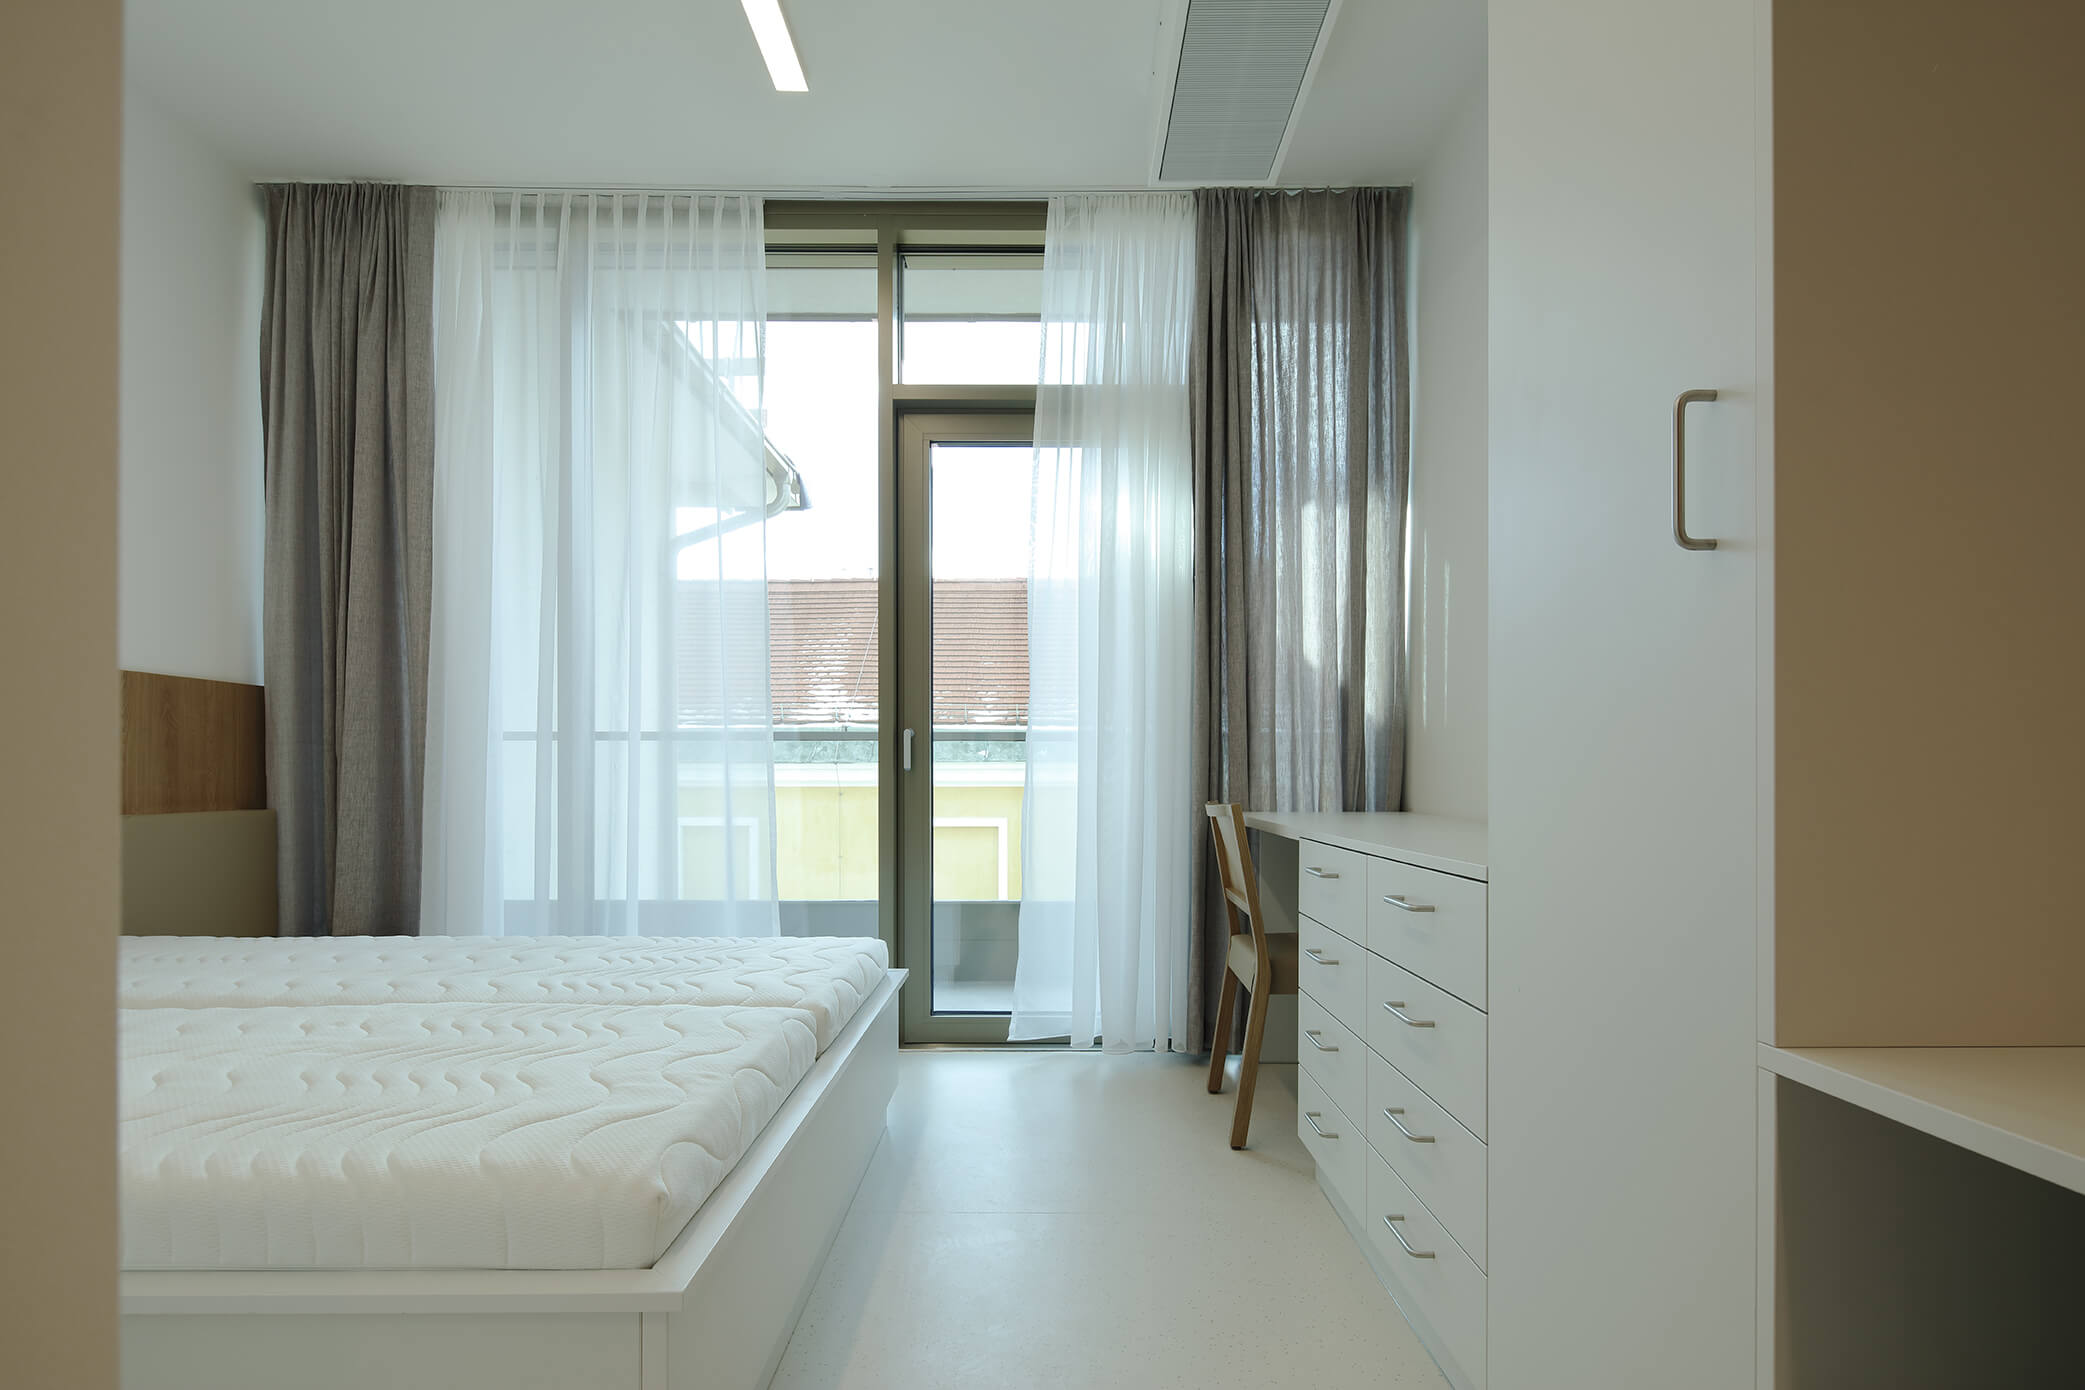 Rooms in the hospital Elisabethinen in Vienna